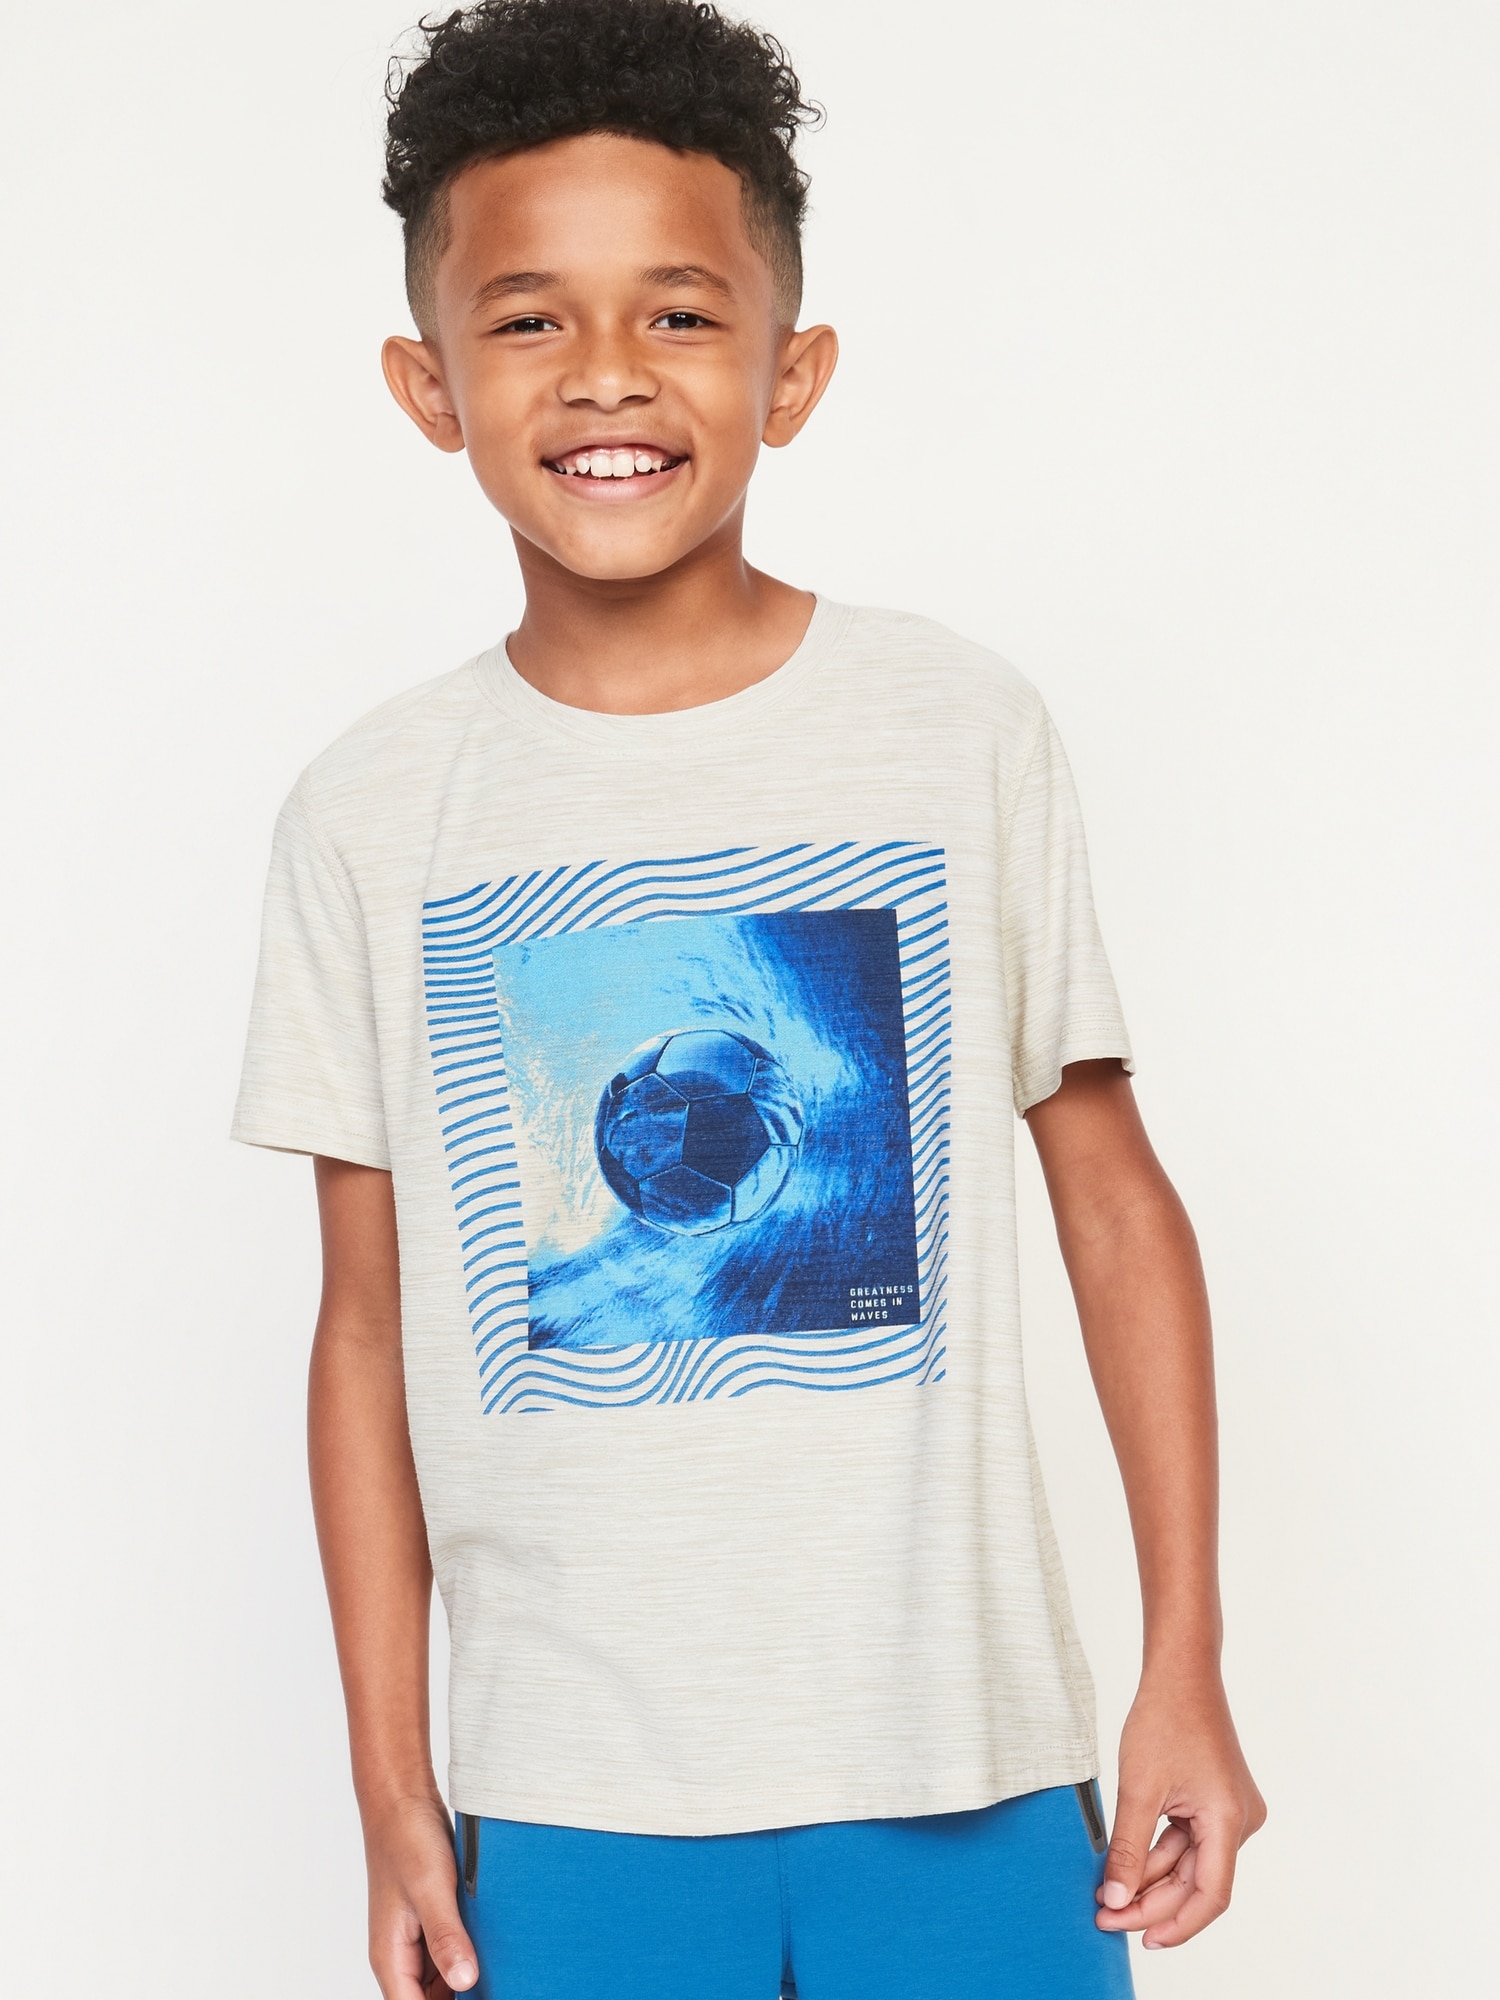 Breathe ON Graphic T-Shirt for Boys | Old Navy